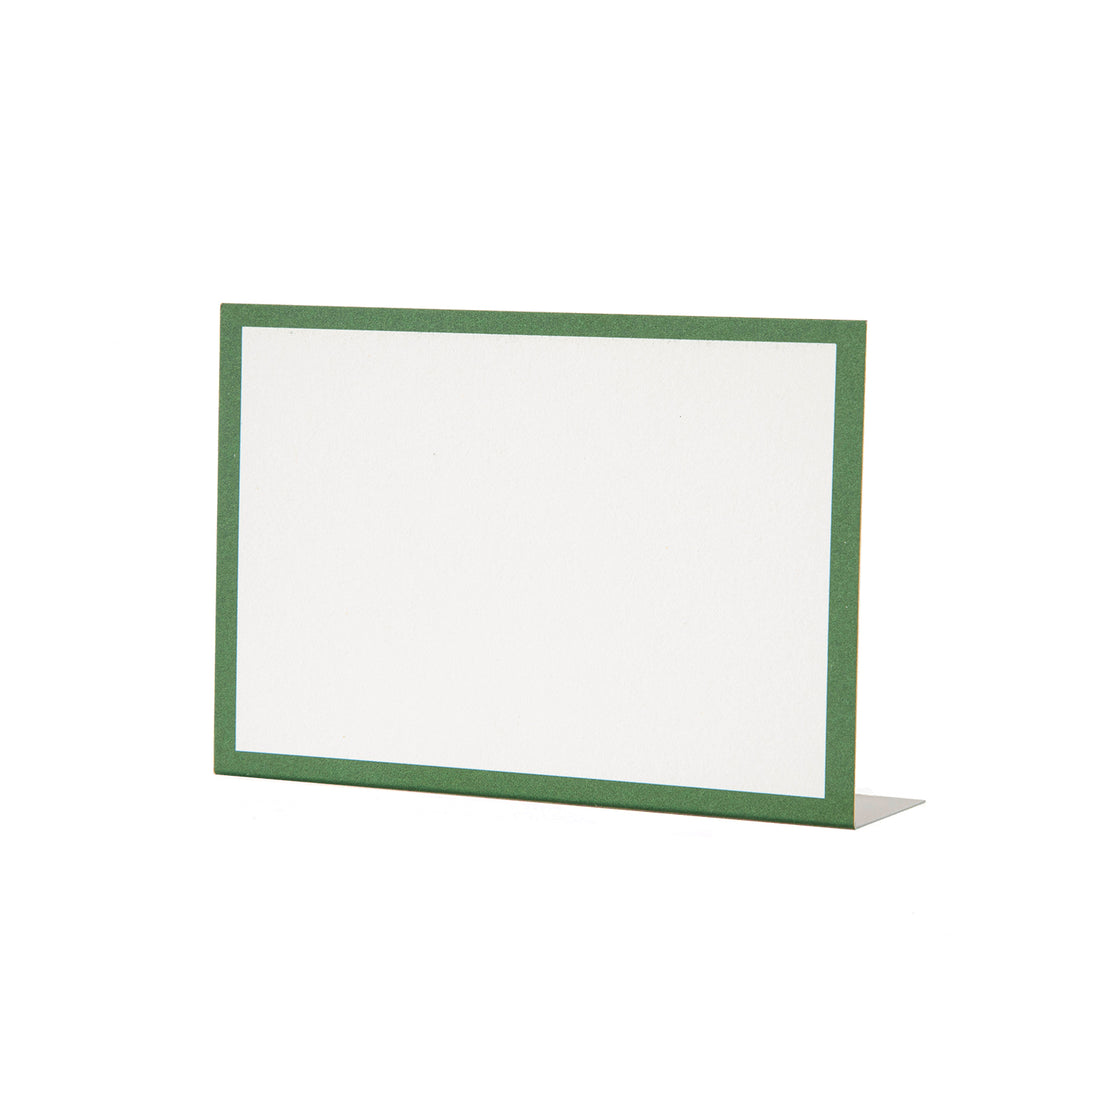 A free-standing, rectangular white table card with a simple dark green frame around the edges.